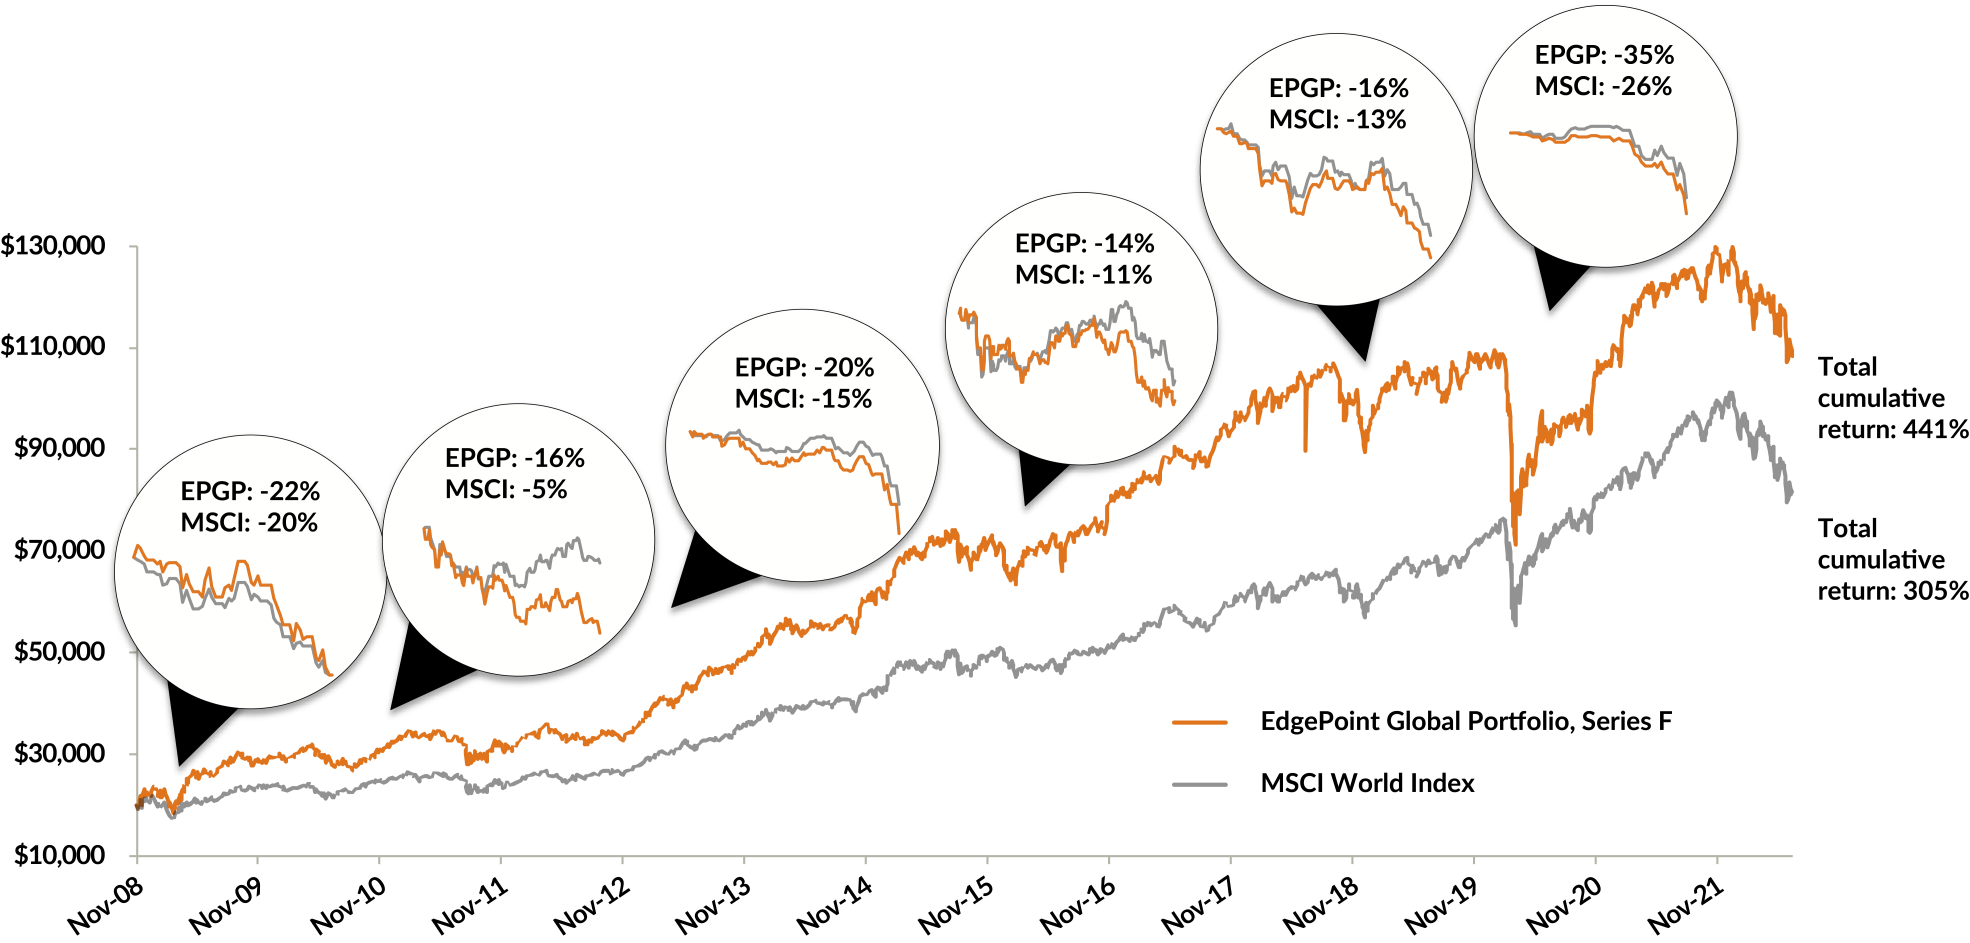 Chart showing the growth of $20,000 invested in EdgePoint Global Portfolio, Series F and the MSCI World Index from November 17, 2008 to June 30, 2022. It highlights six periods of declines of at least 14%. The Fund underperformed the MSCI World Index during each of the periods, but outperformed in the end with a total cumulative return of 441% for EdgePoint compared to 305% for the index. 